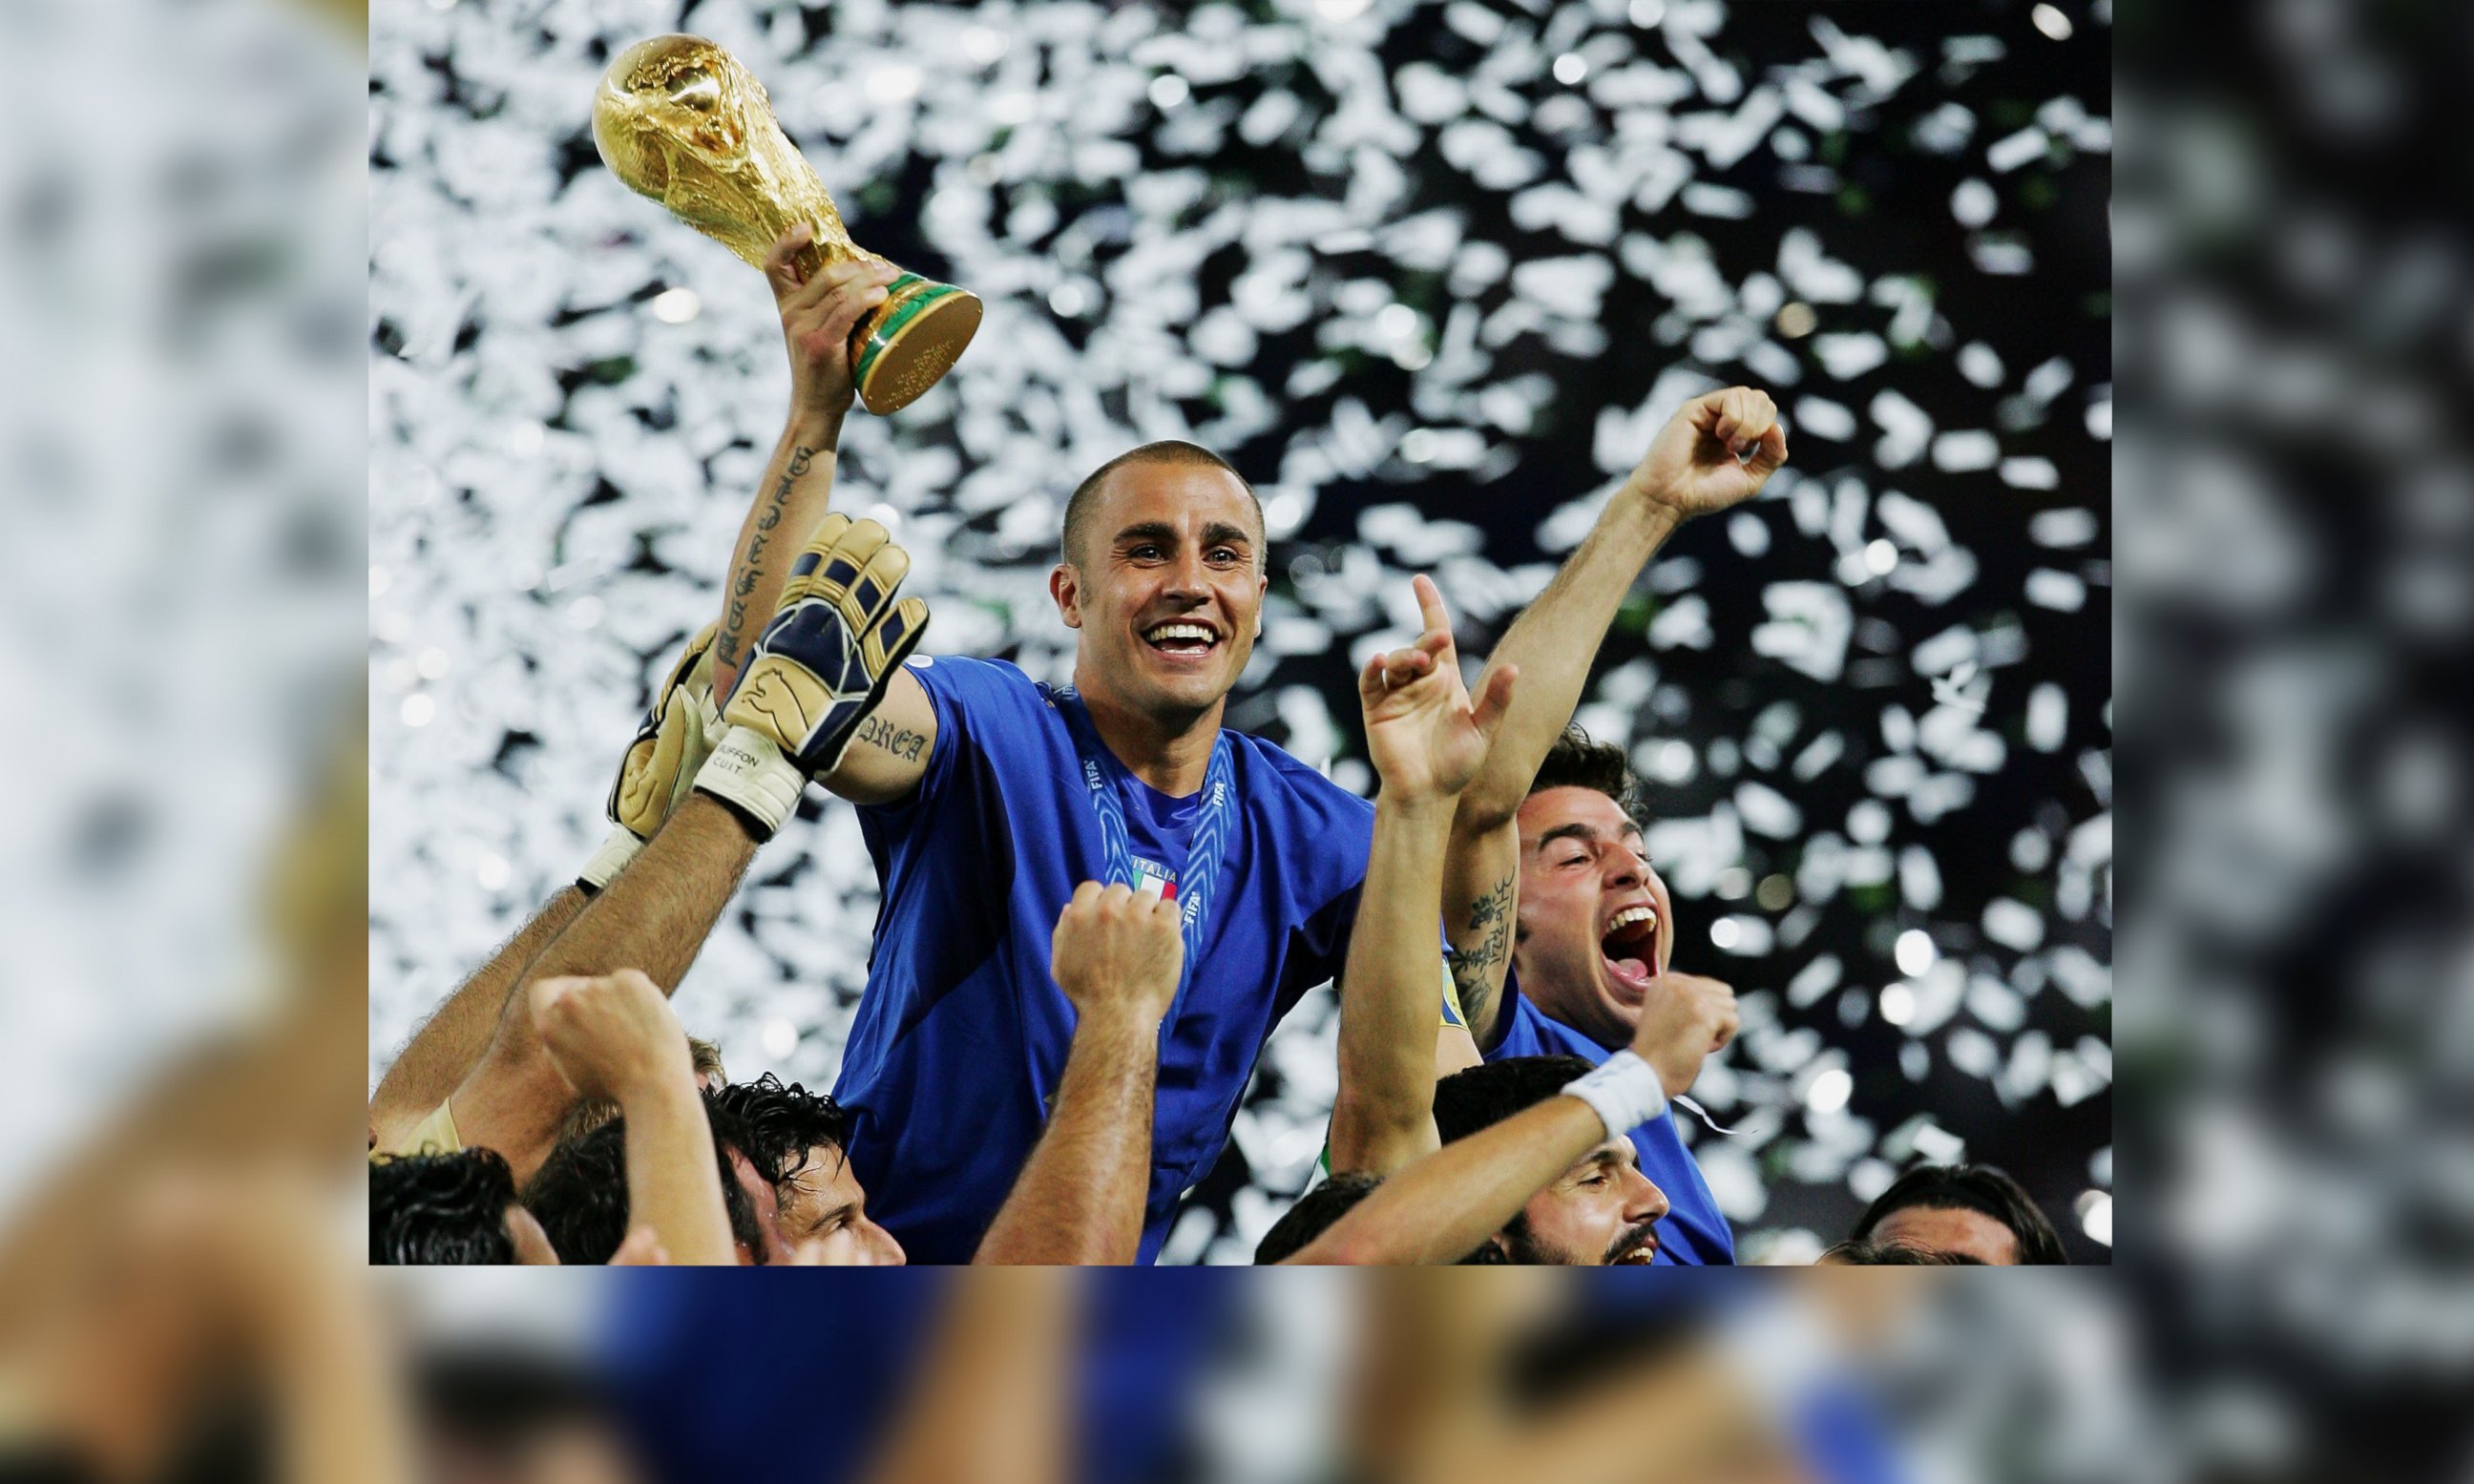 PHOTO: Fabio Cannavaro of Italy lifts the World Cup trophy aloft following victory in a penalty shootout at the end of World Cup Final match between Italy and France at the Olympic Stadium on July 9, 2006 in Berlin, Germany.